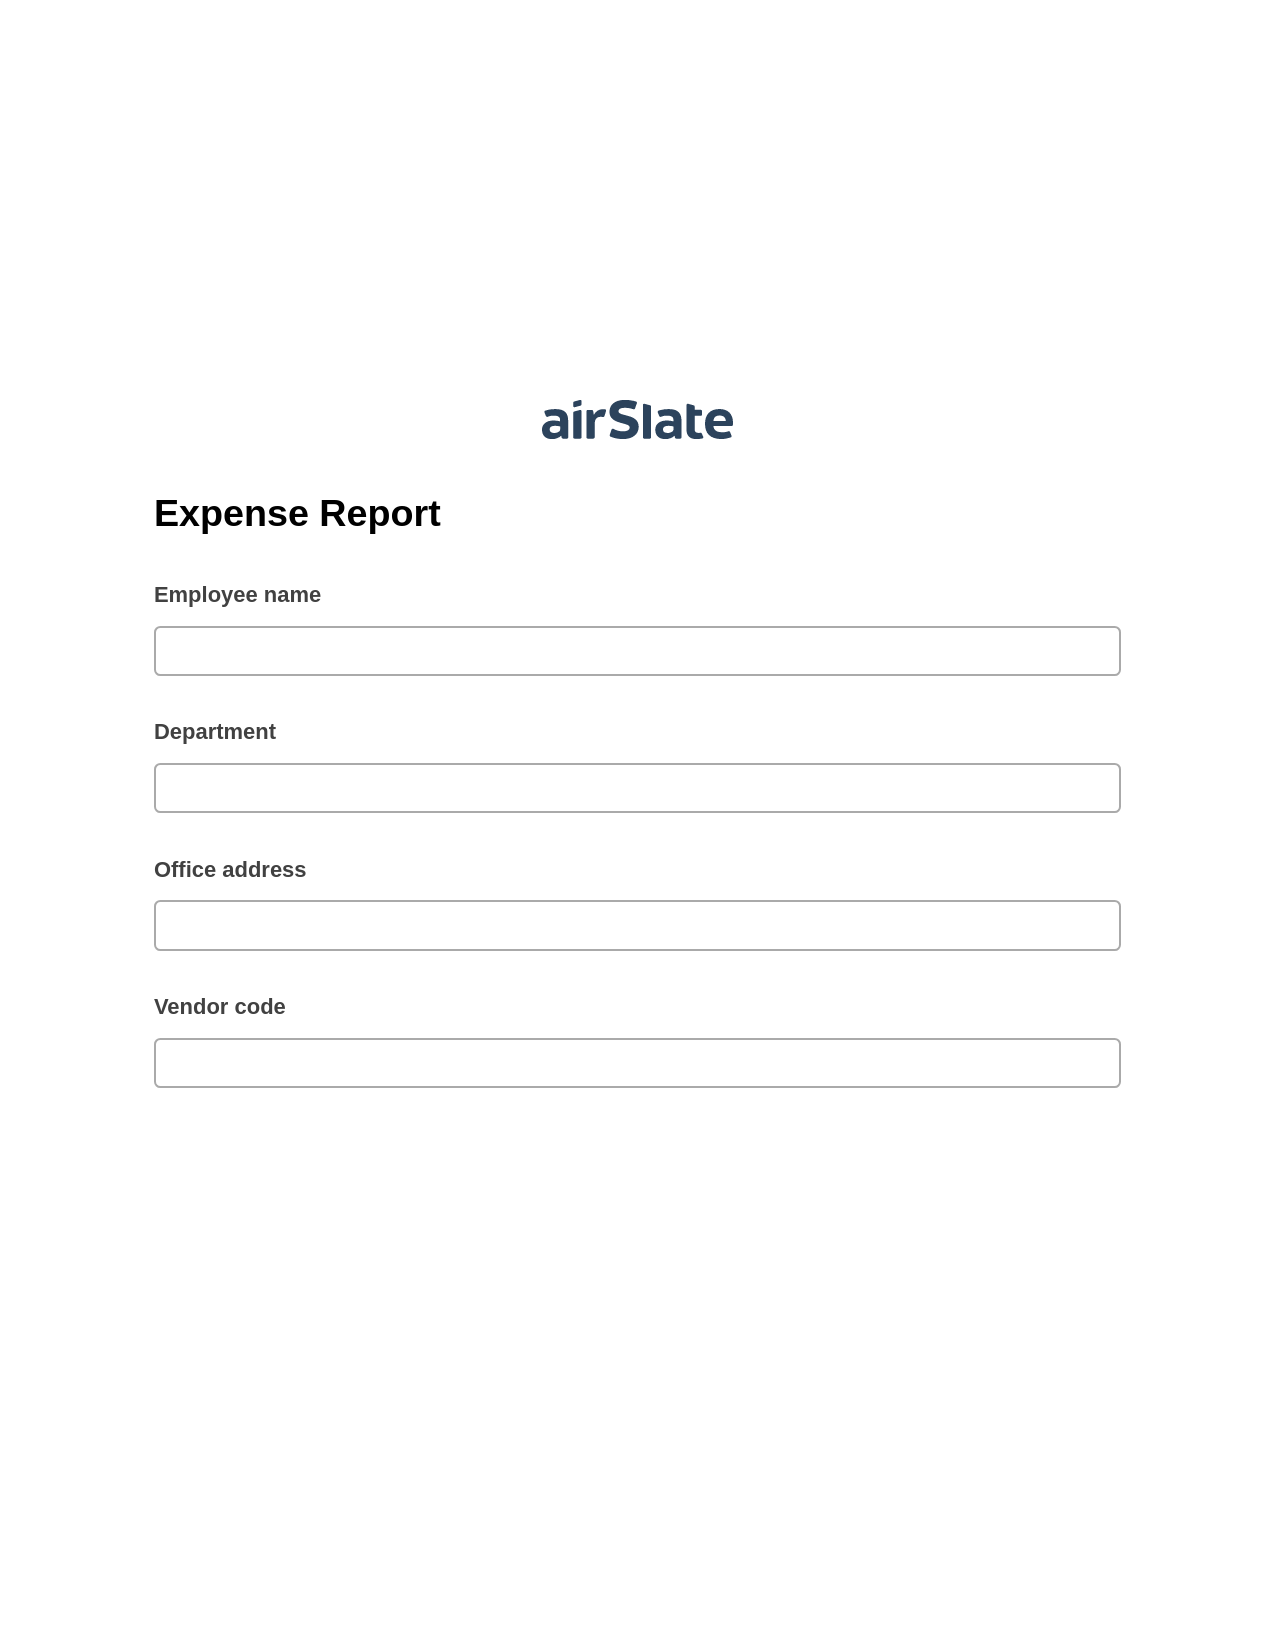 Multirole Expense Report Pre-fill Slate from MS Dynamics 365 Records Bot, Create QuickBooks invoice Bot, Export to Formstack Documents Bot